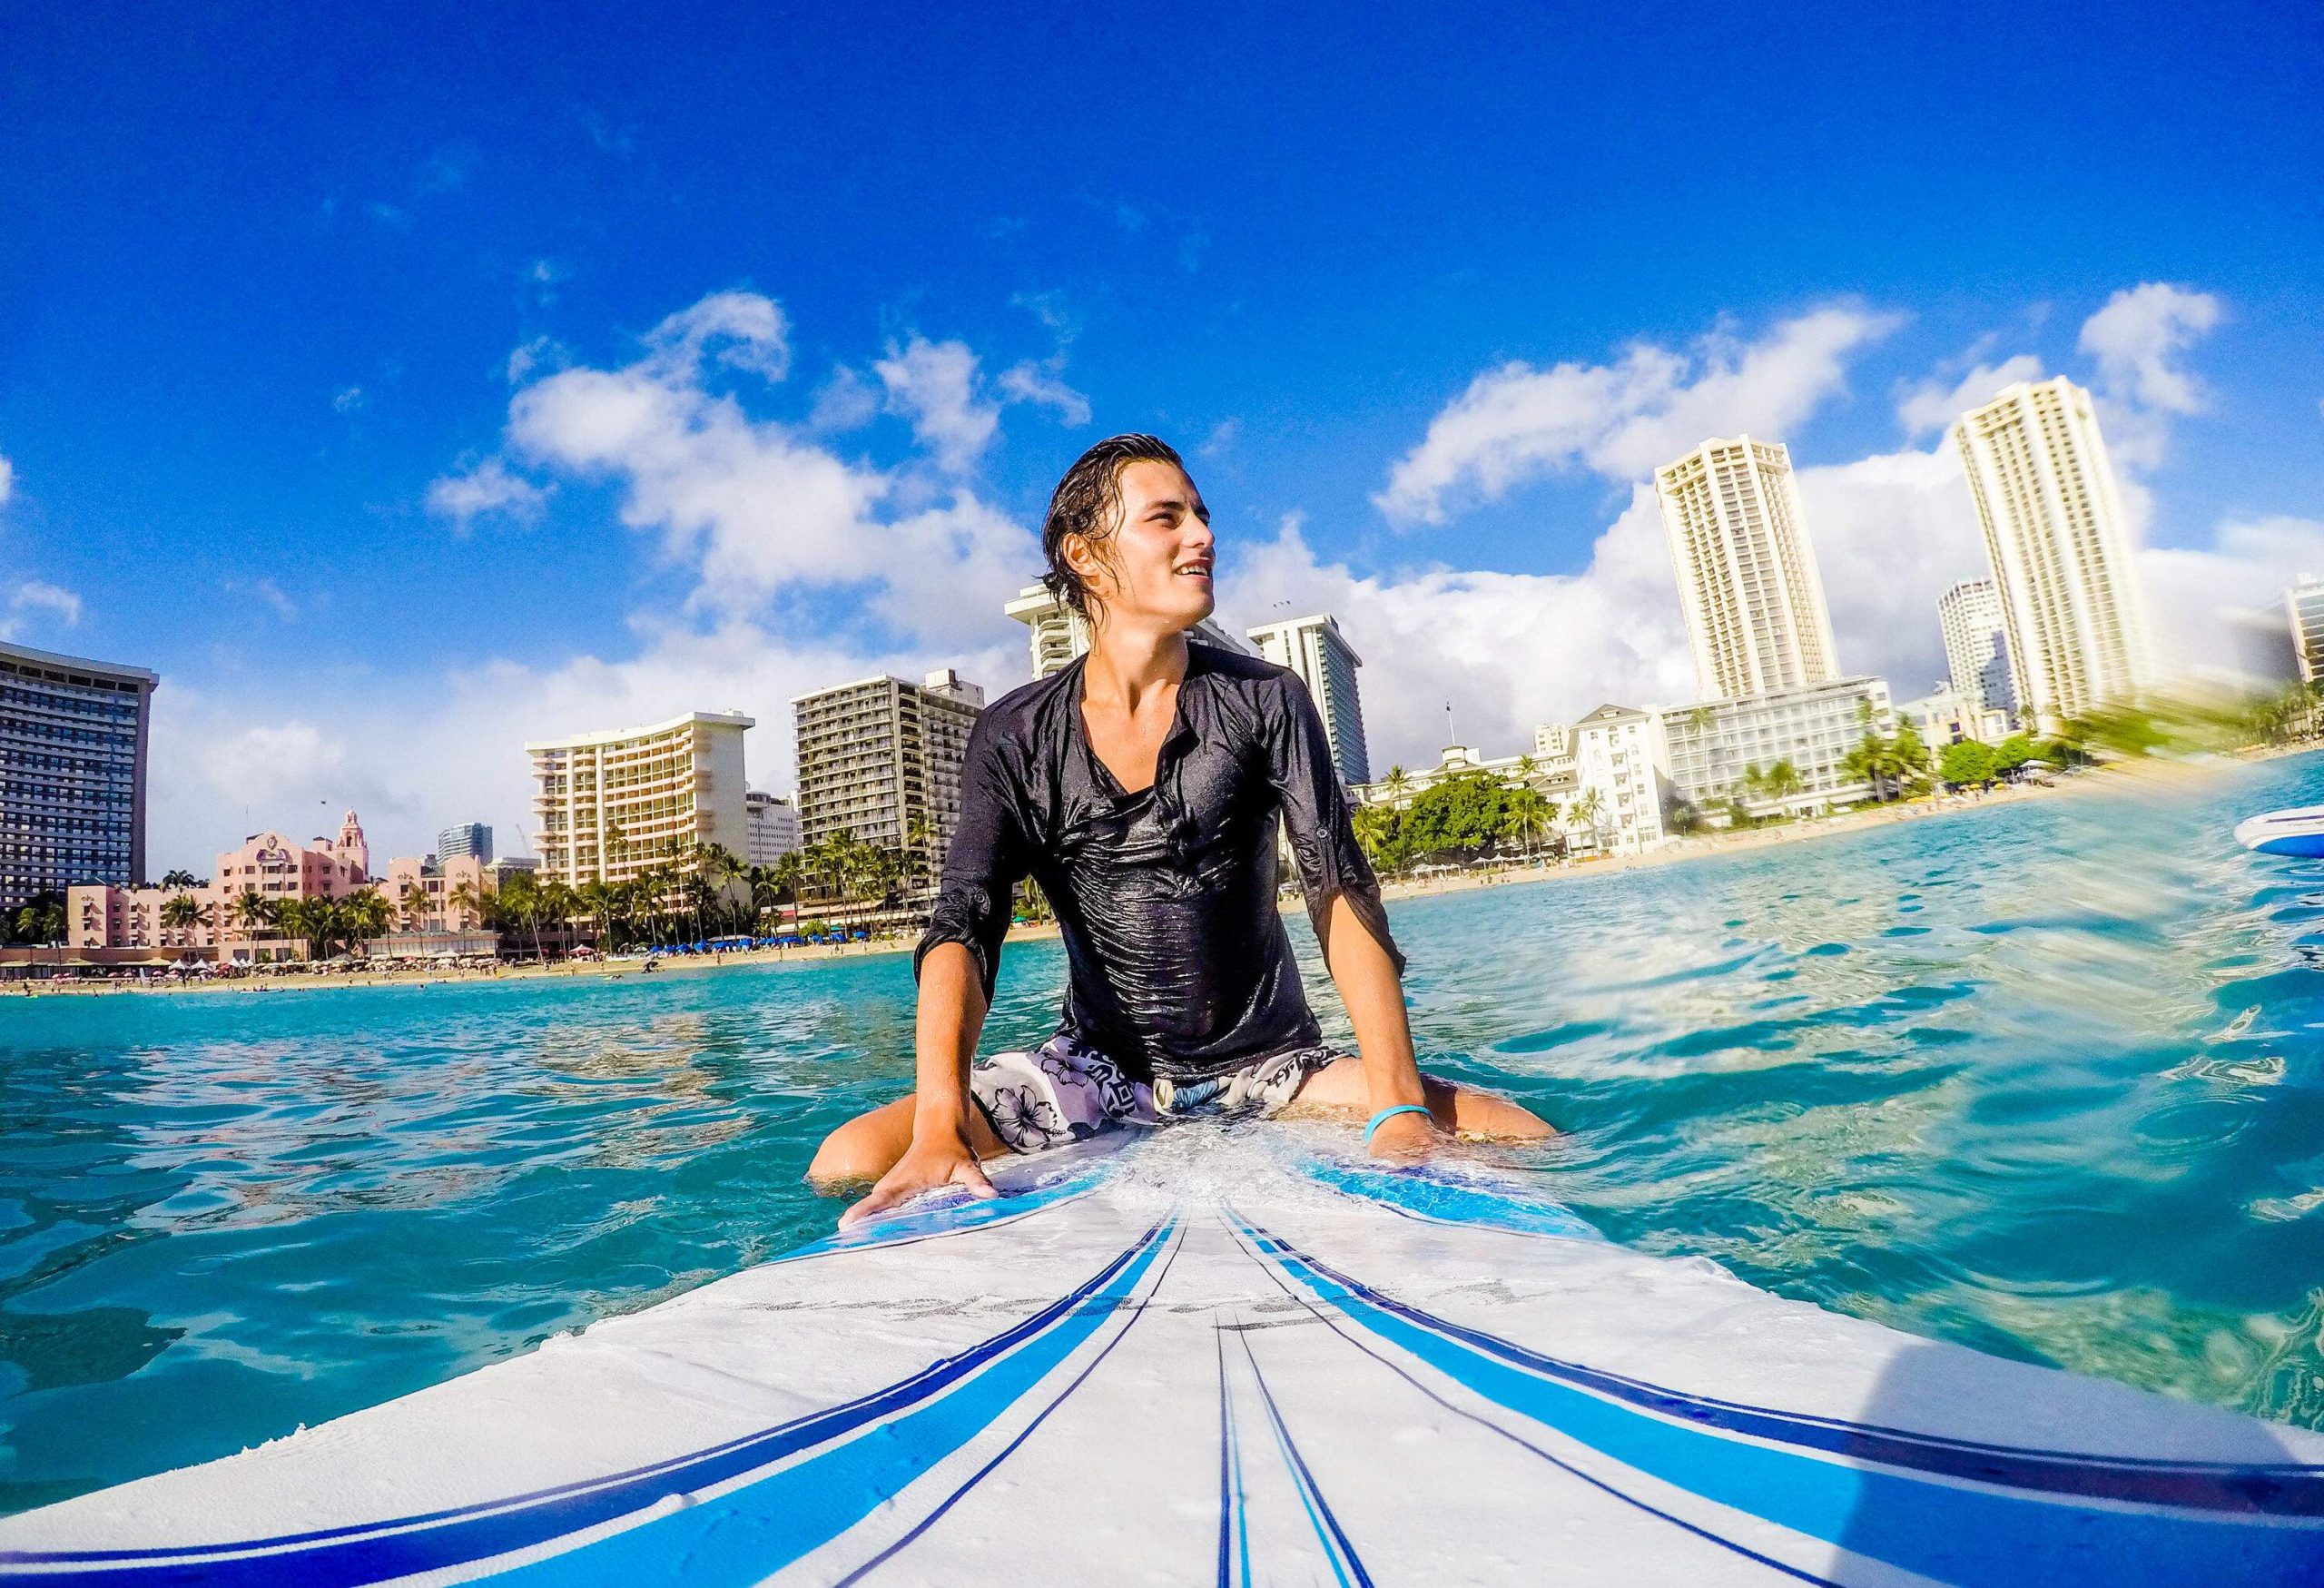 A person sits serenely on a surfboard atop the water, gazing into the distance, with a backdrop of buildings adding a touch of urban contrast to the peaceful coastal scene.